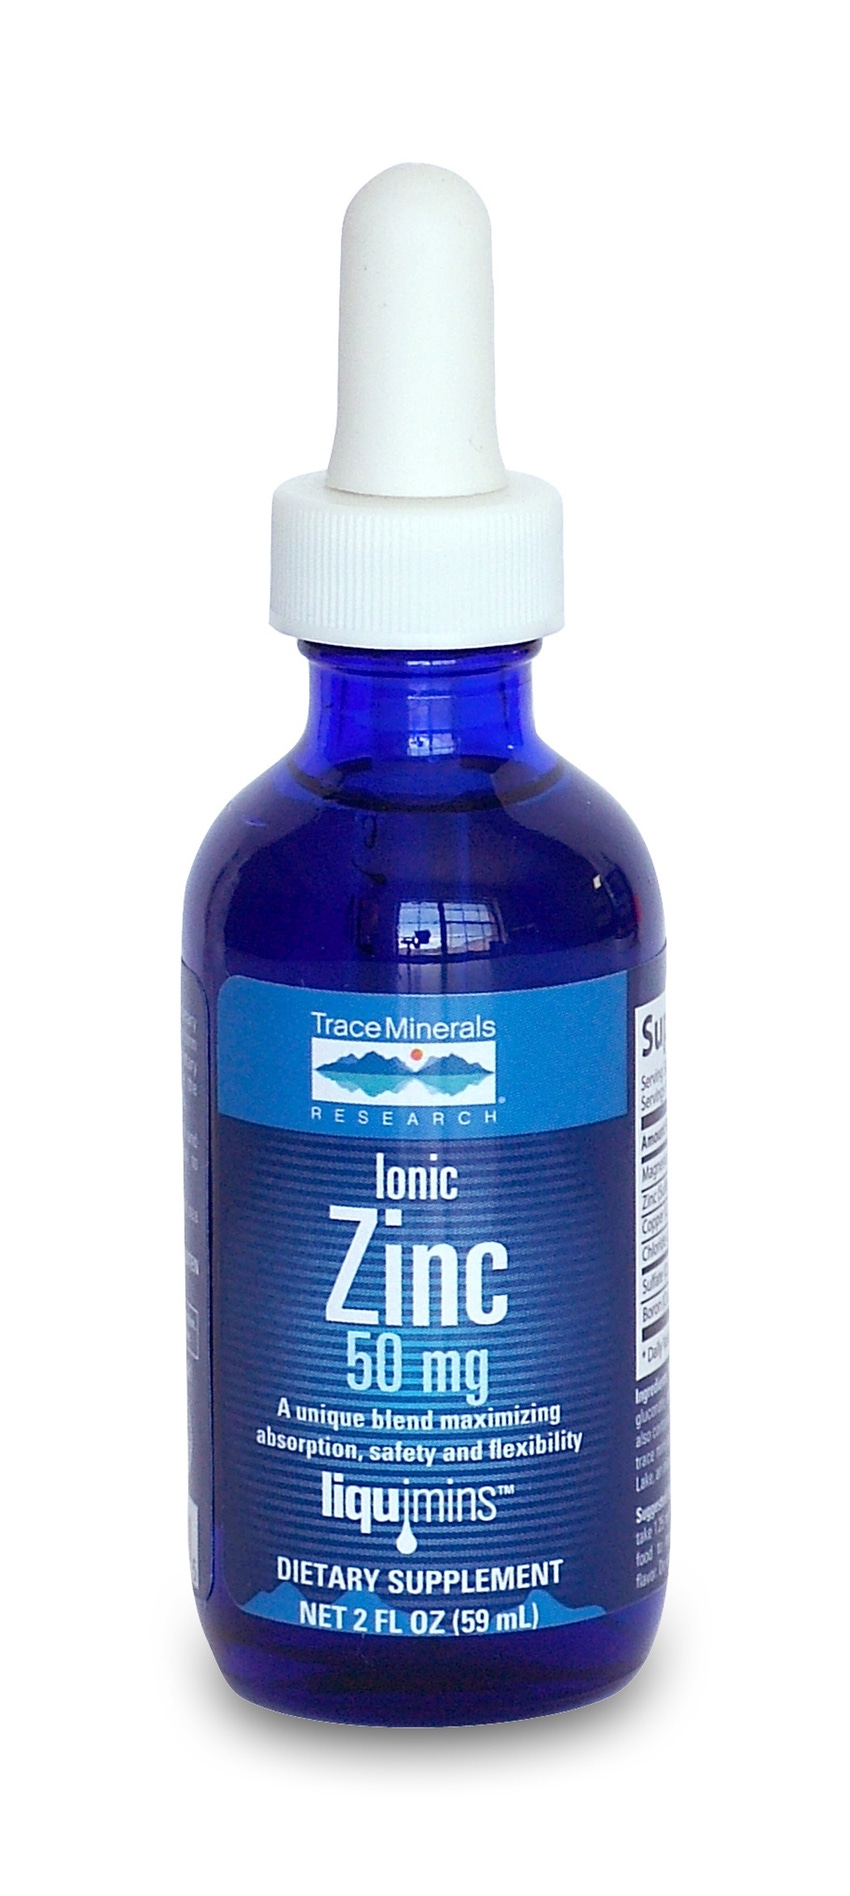 TMR Ionic Zinc approved by ConsumerLab.com